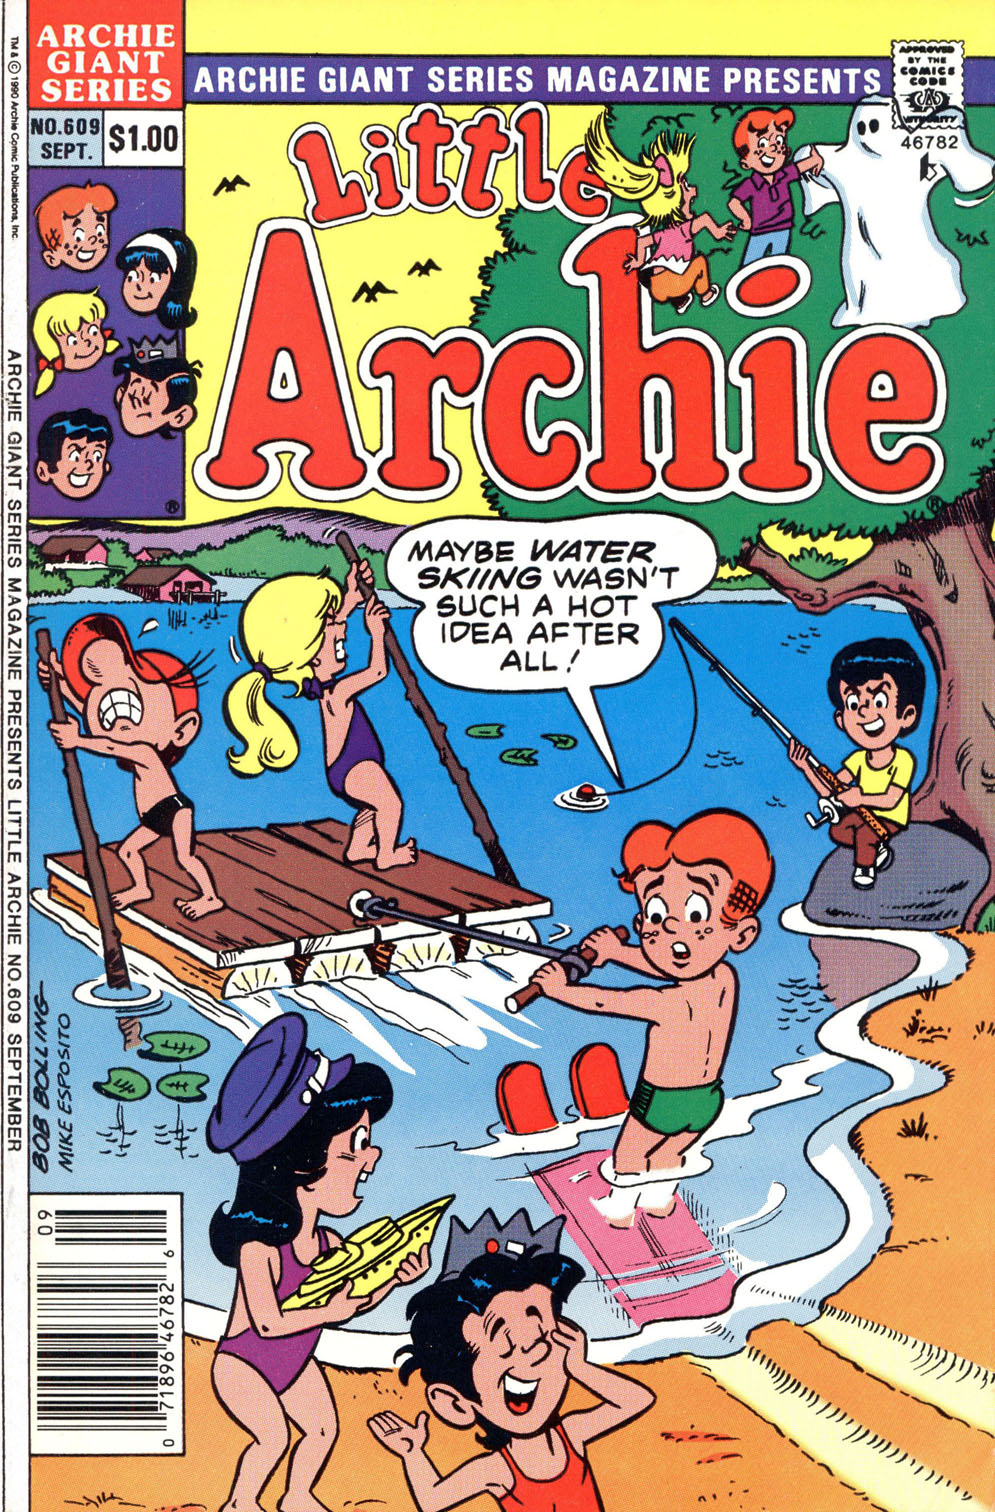 Archie Giant Series Magazine 609 Page 1